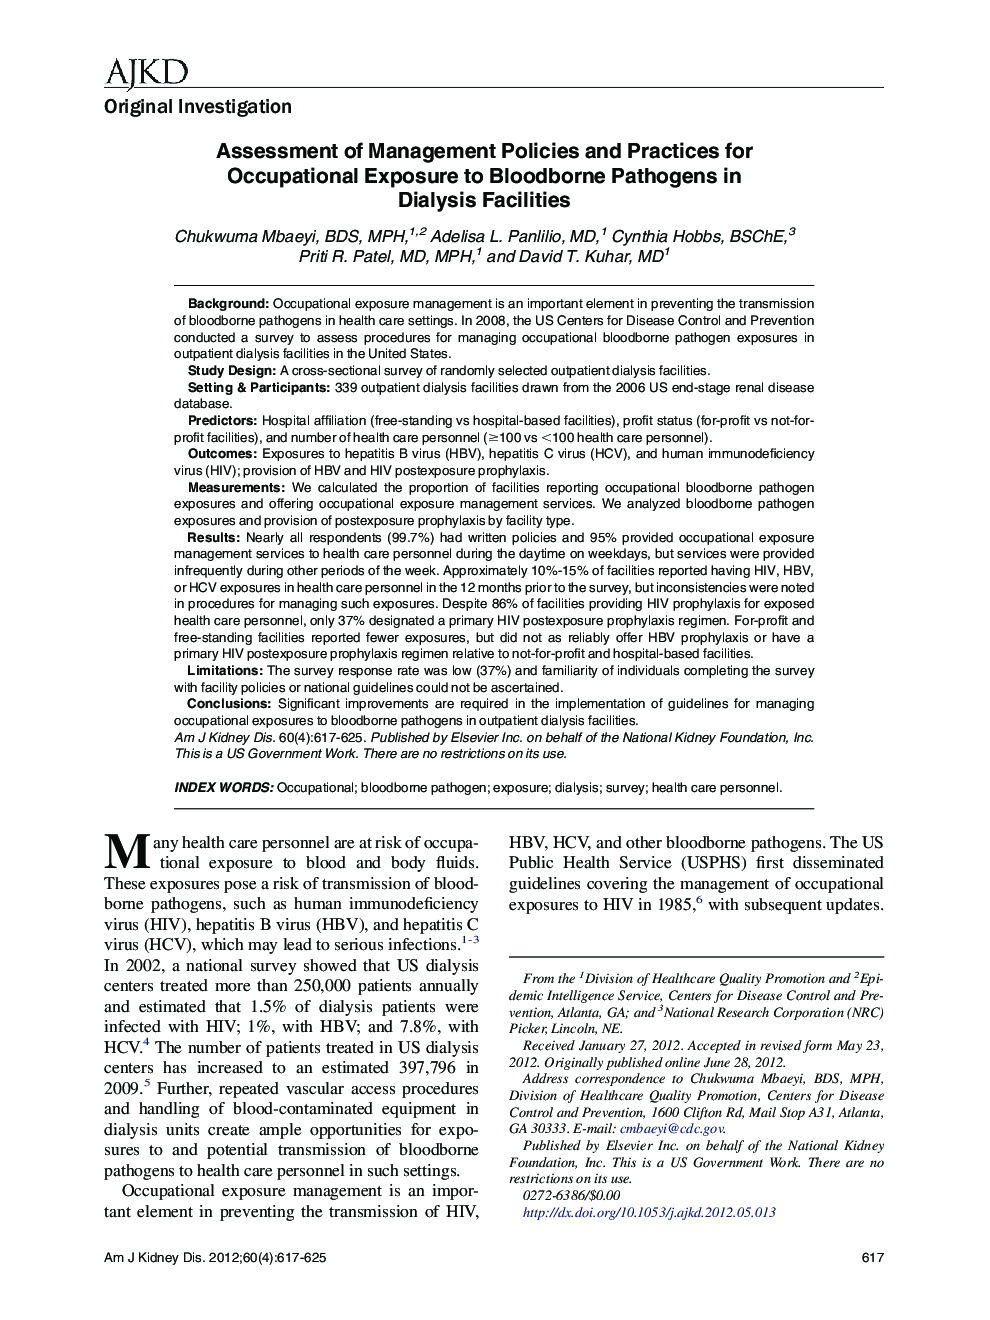 Assessment of Management Policies and Practices for Occupational Exposure to Bloodborne Pathogens in Dialysis Facilities